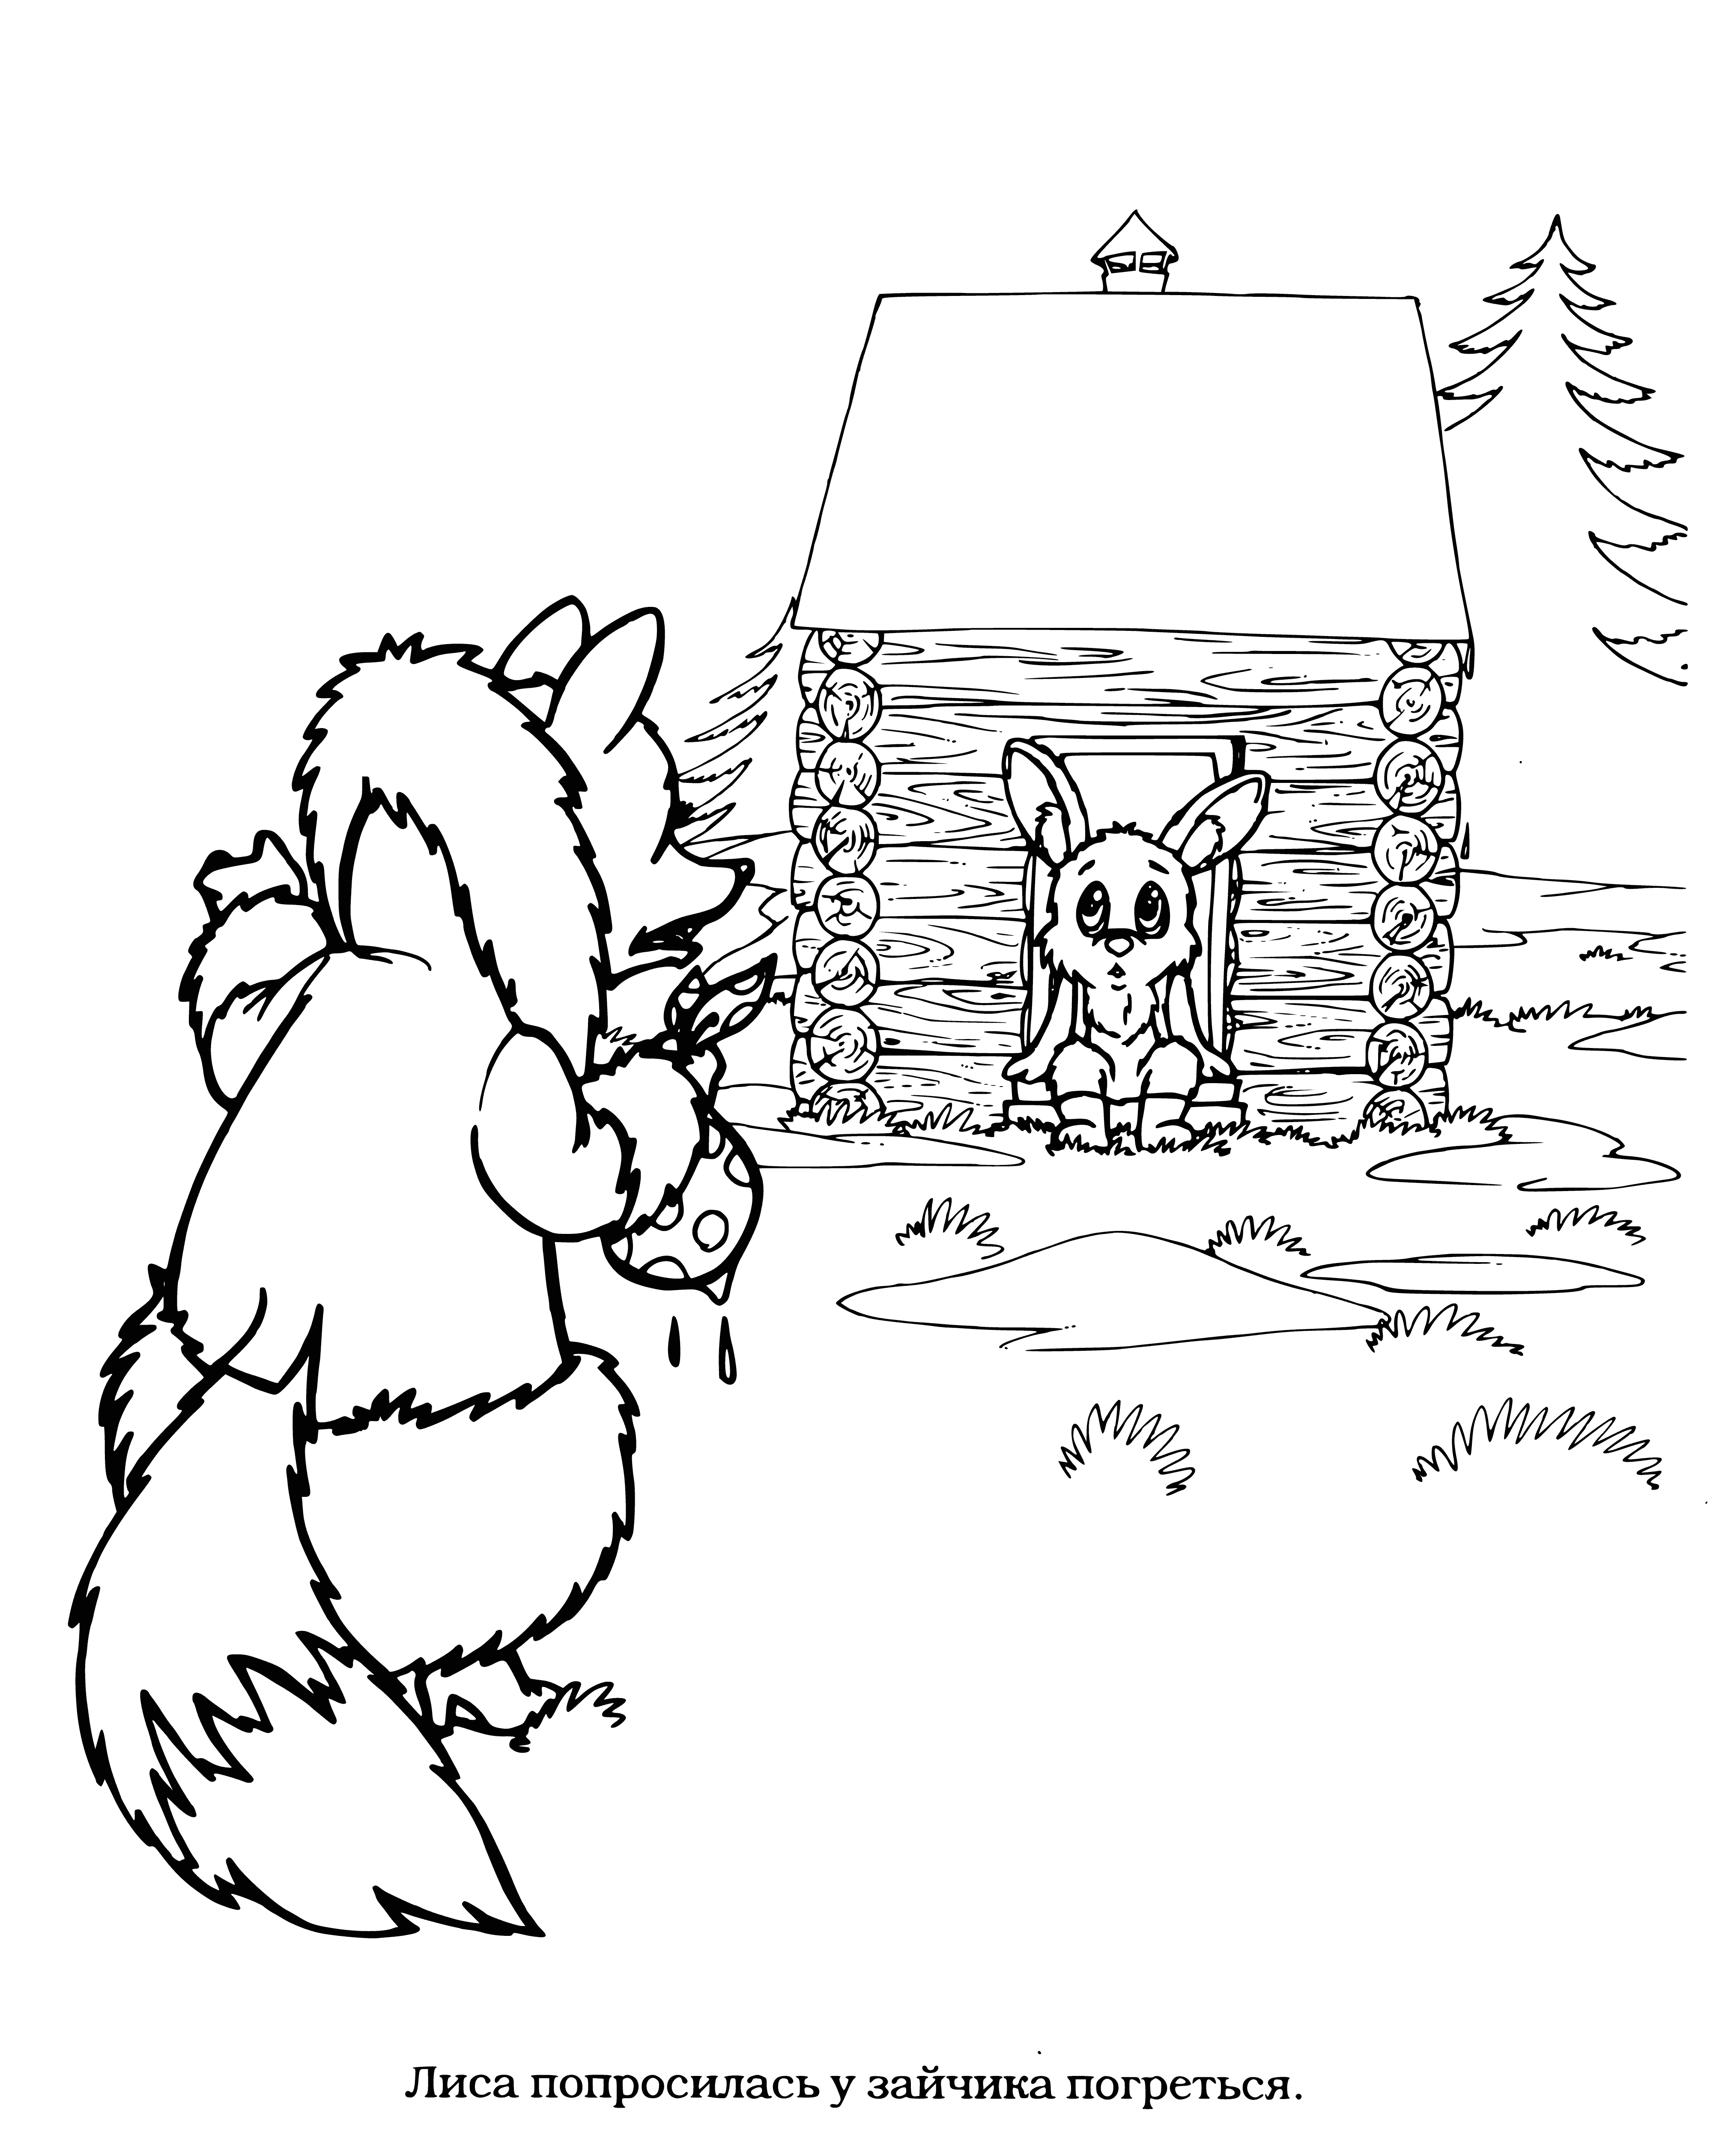 coloring page: Farmer allows fox to stay, eats his chickens, and leaves. Wife scolds farmer next morning.